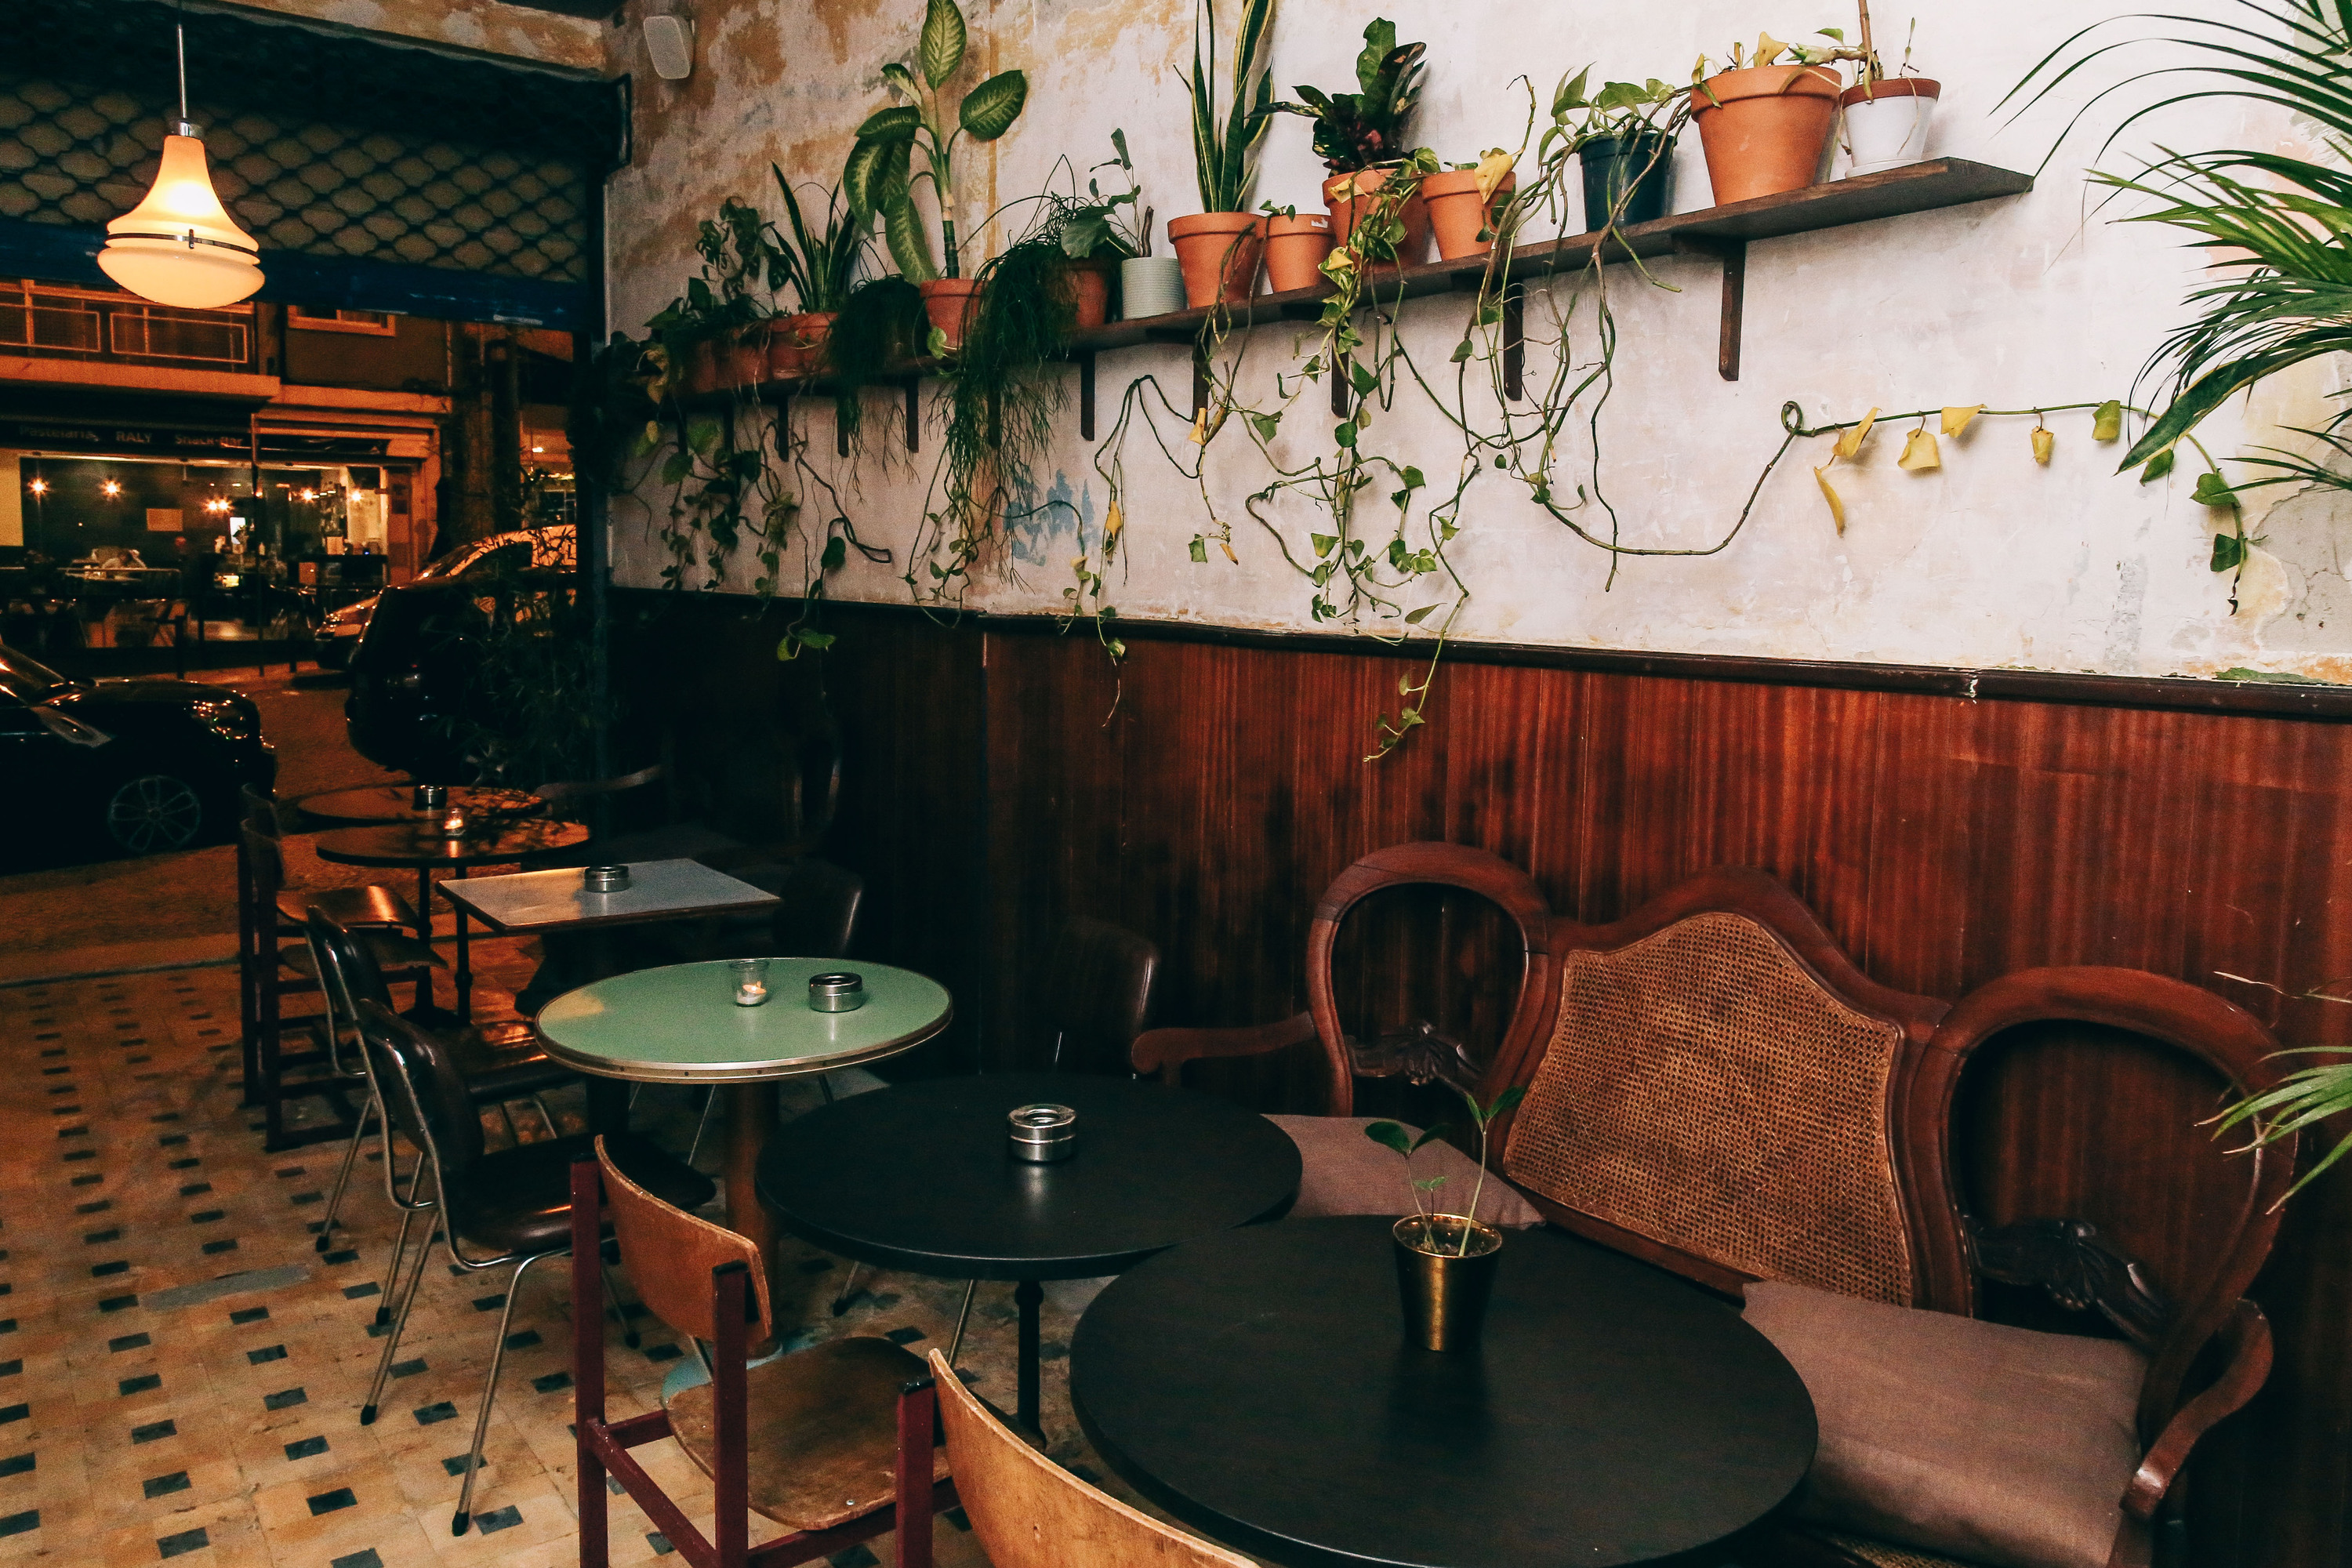 This is Lisbon's most talked-about hidden restaurant, Comadre